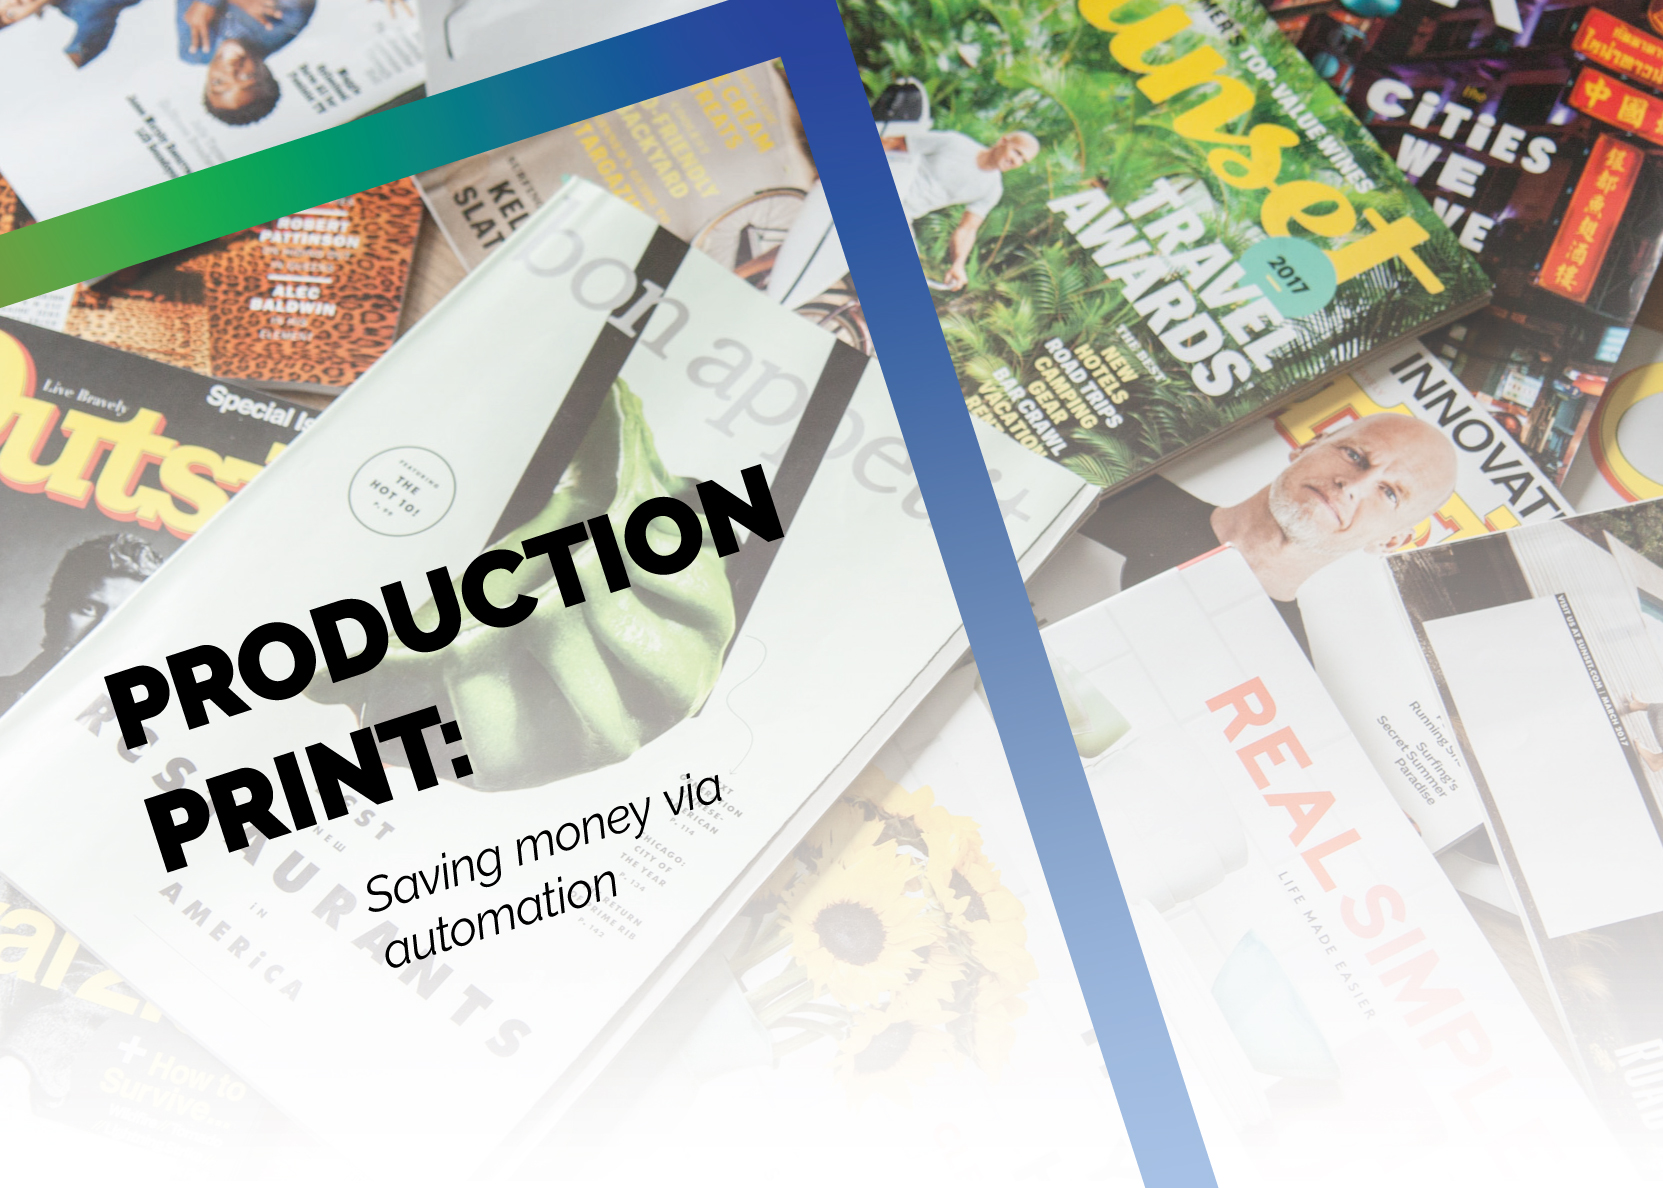 How Can I Save Money By Automating My Production Print Process?